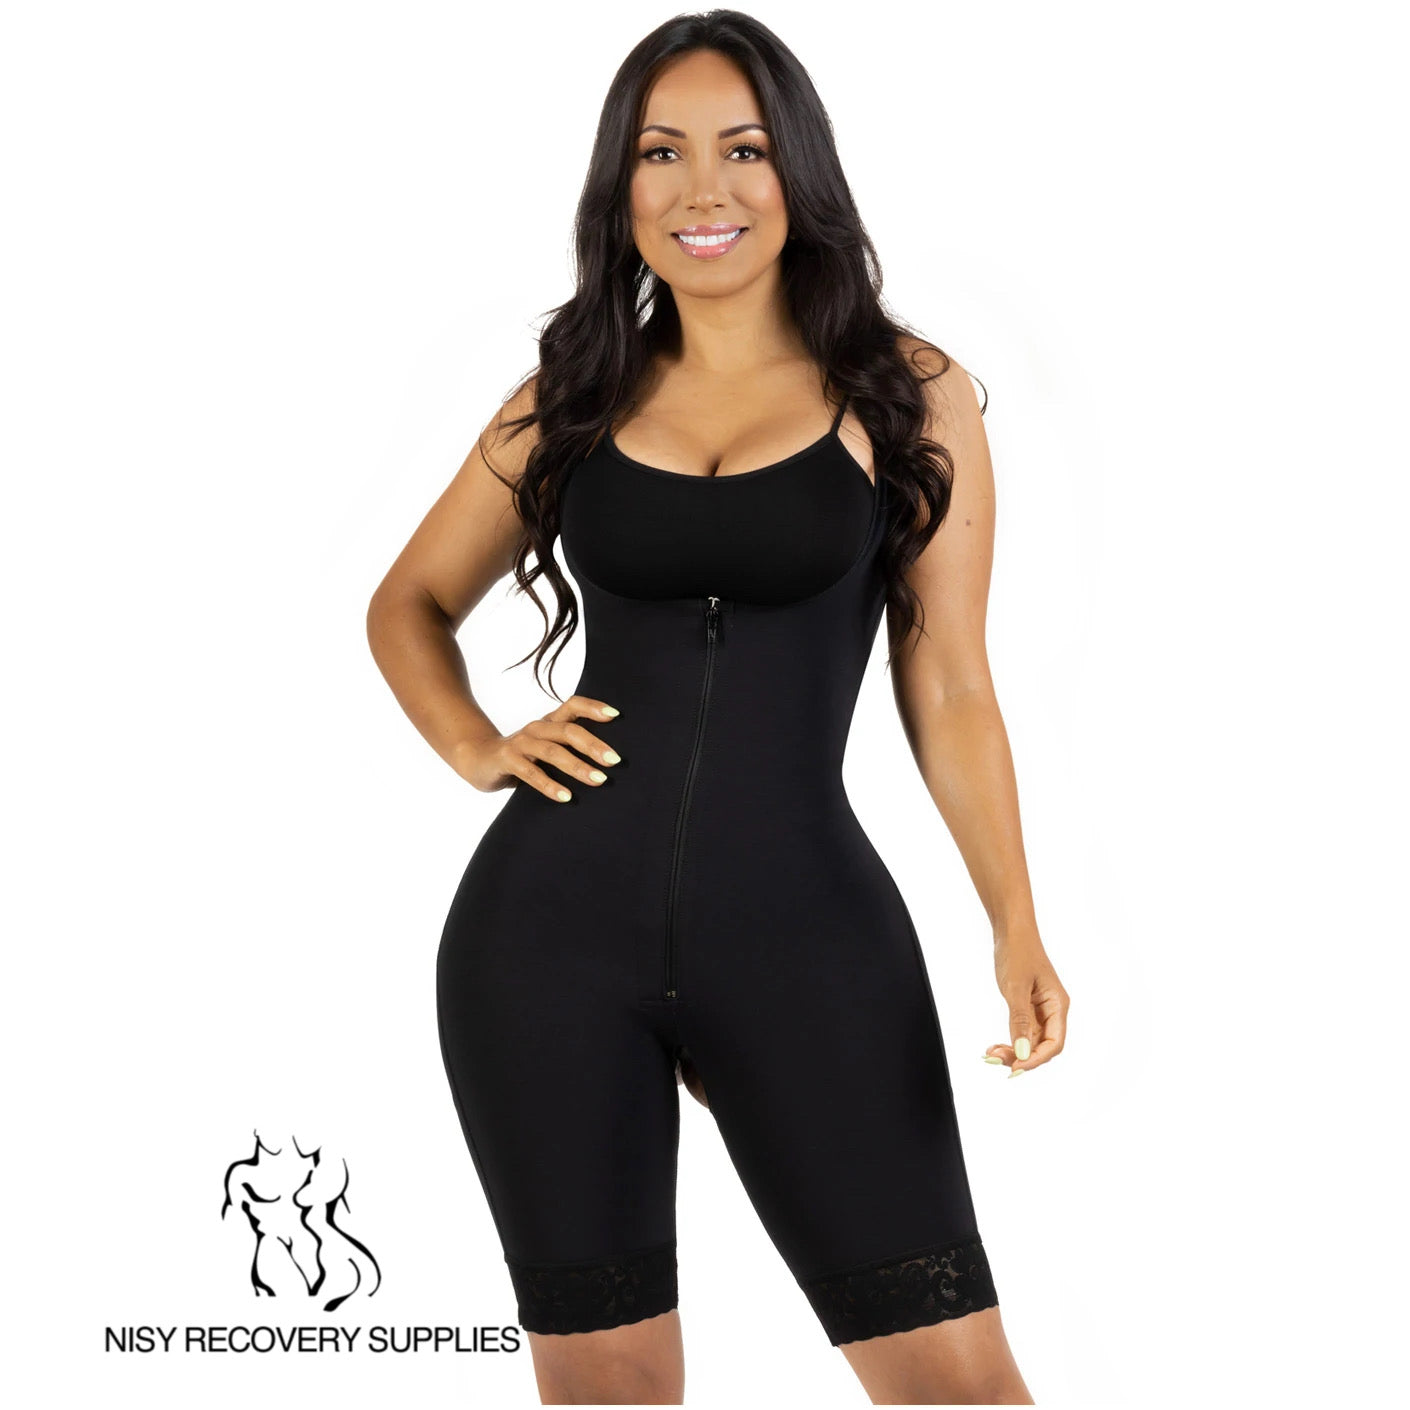 Stage 1 high compression Colombian faja